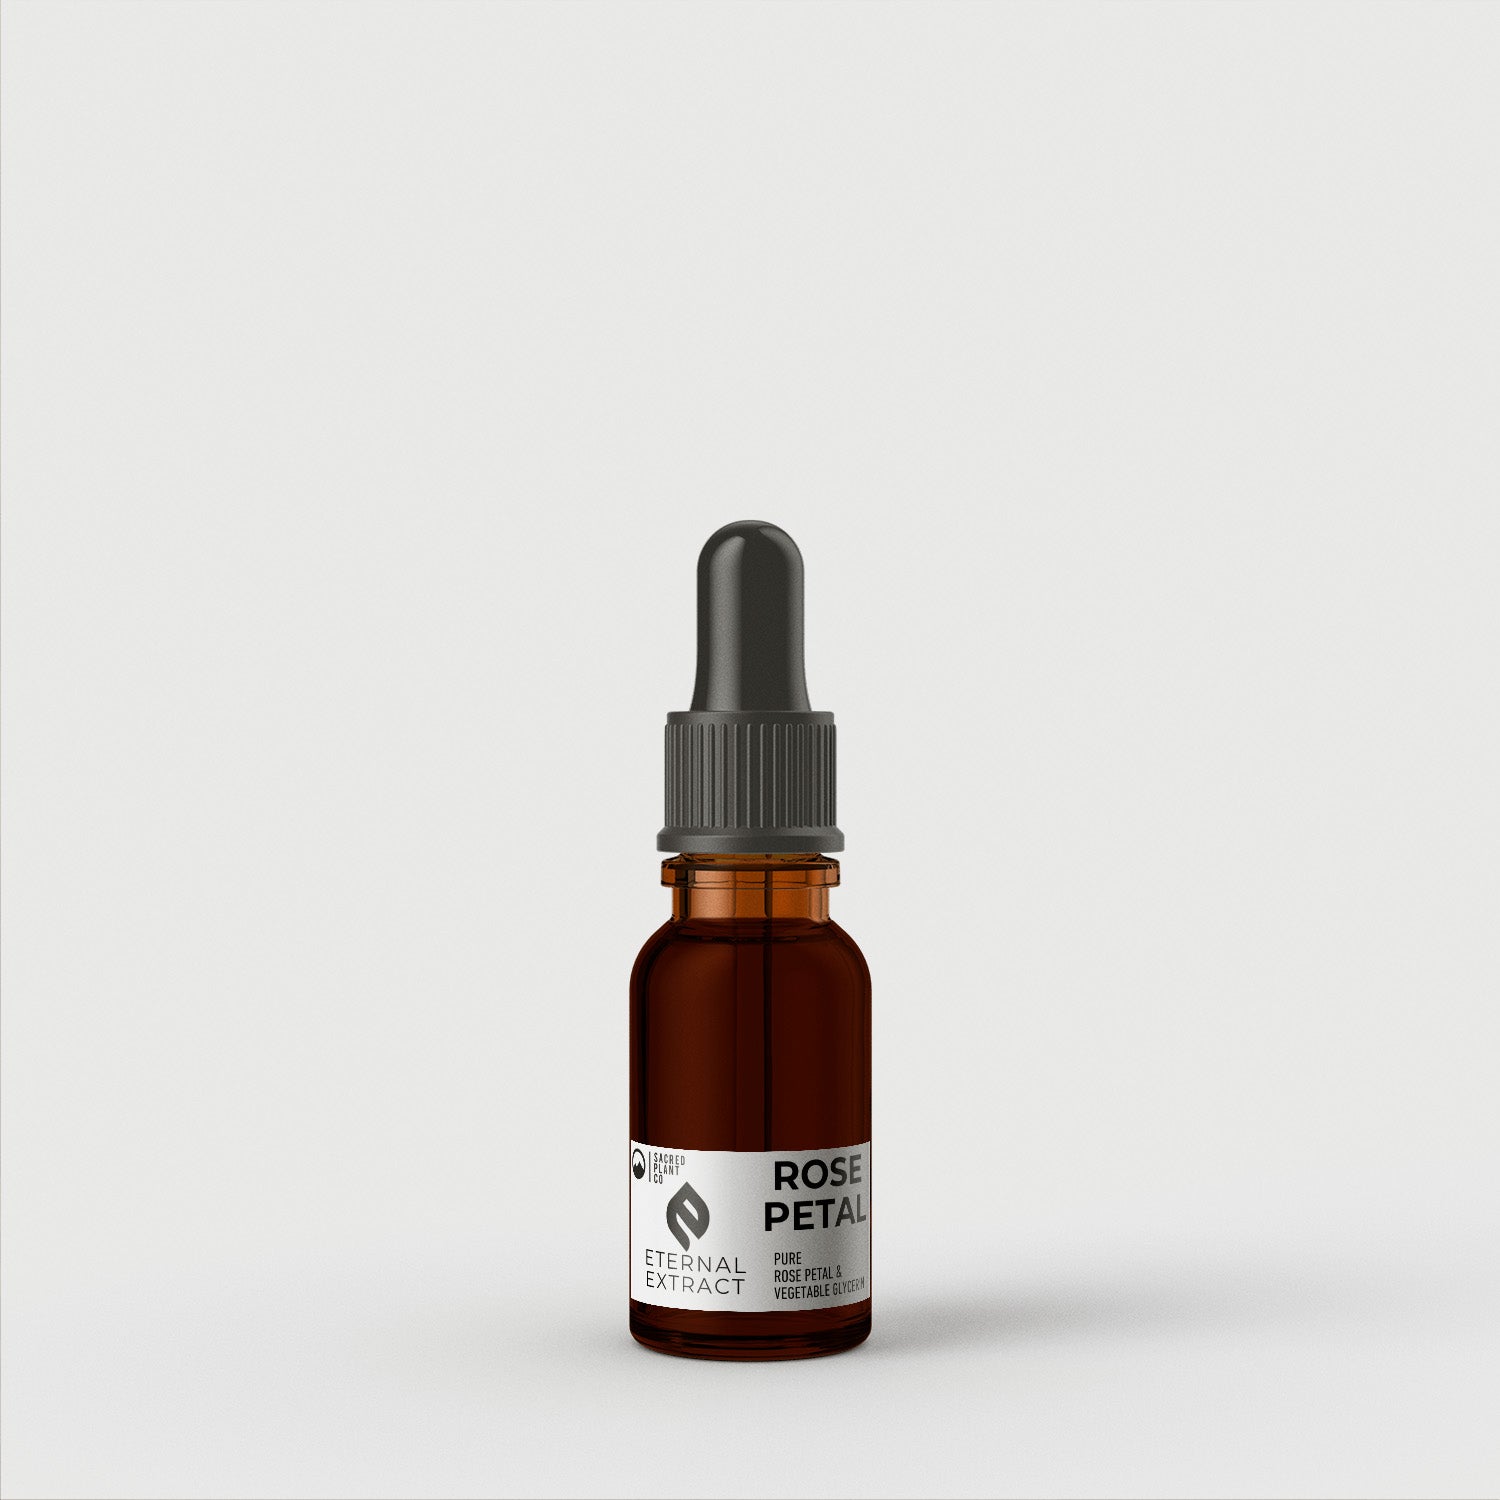 15ml standard rose petal extract in an amber bottle with a dropper, featuring clean label branding, against a grey backdrop for online wellness retailers.